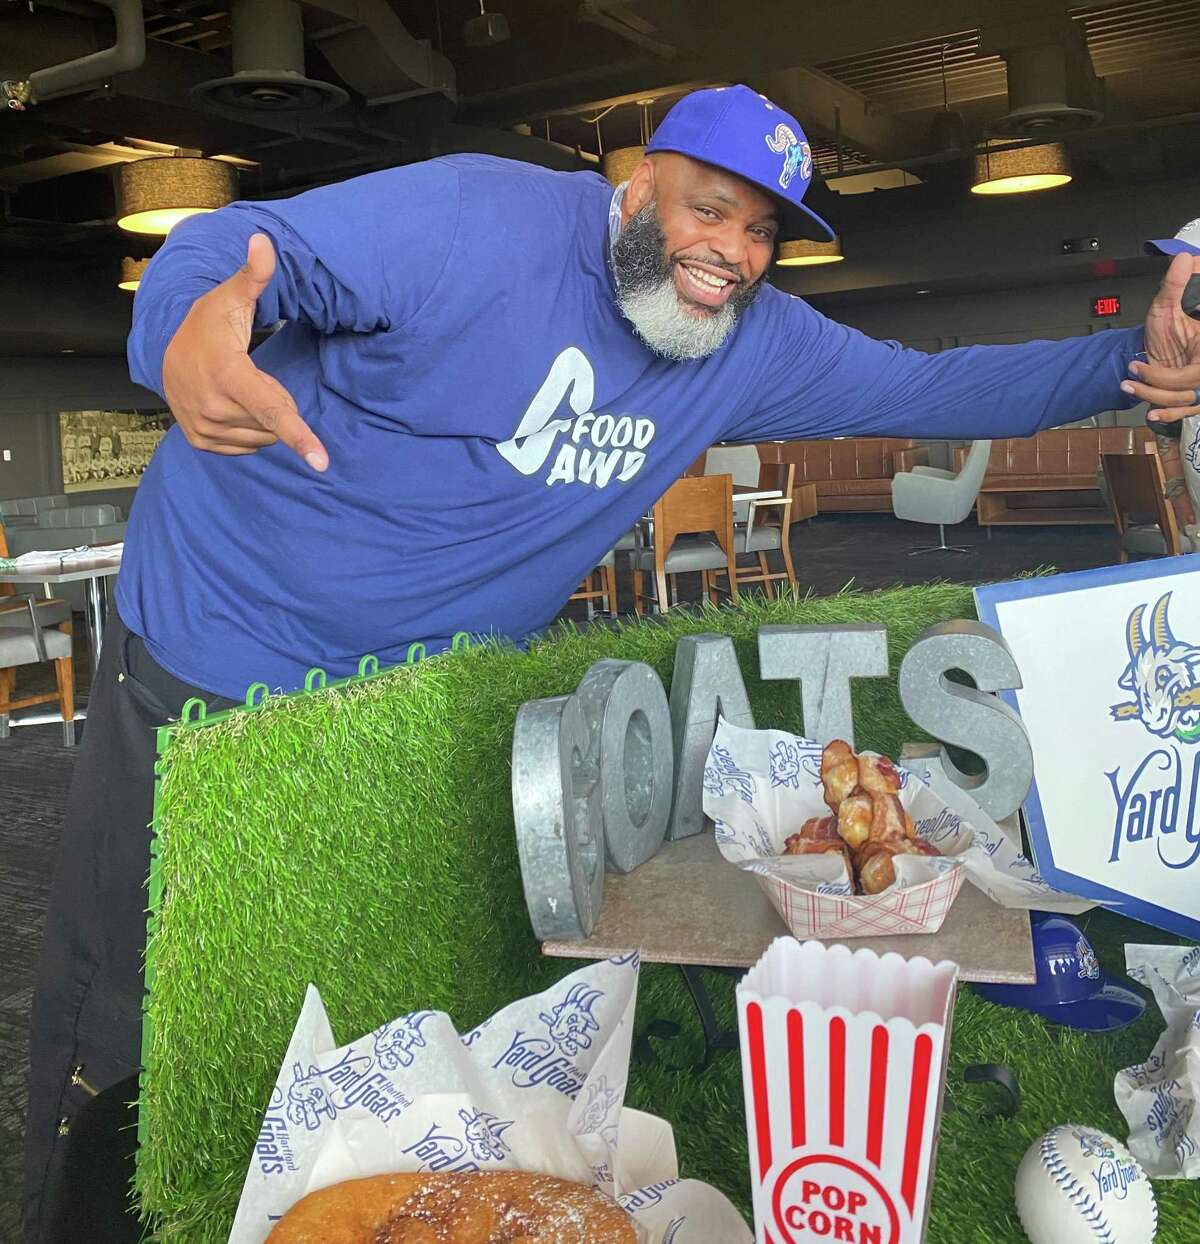 Daymon “Daym Drops” Patterson, a celebrity YouTube food critic, is launching Daym Drops Diner at Dunkin’ Donuts Park this season.